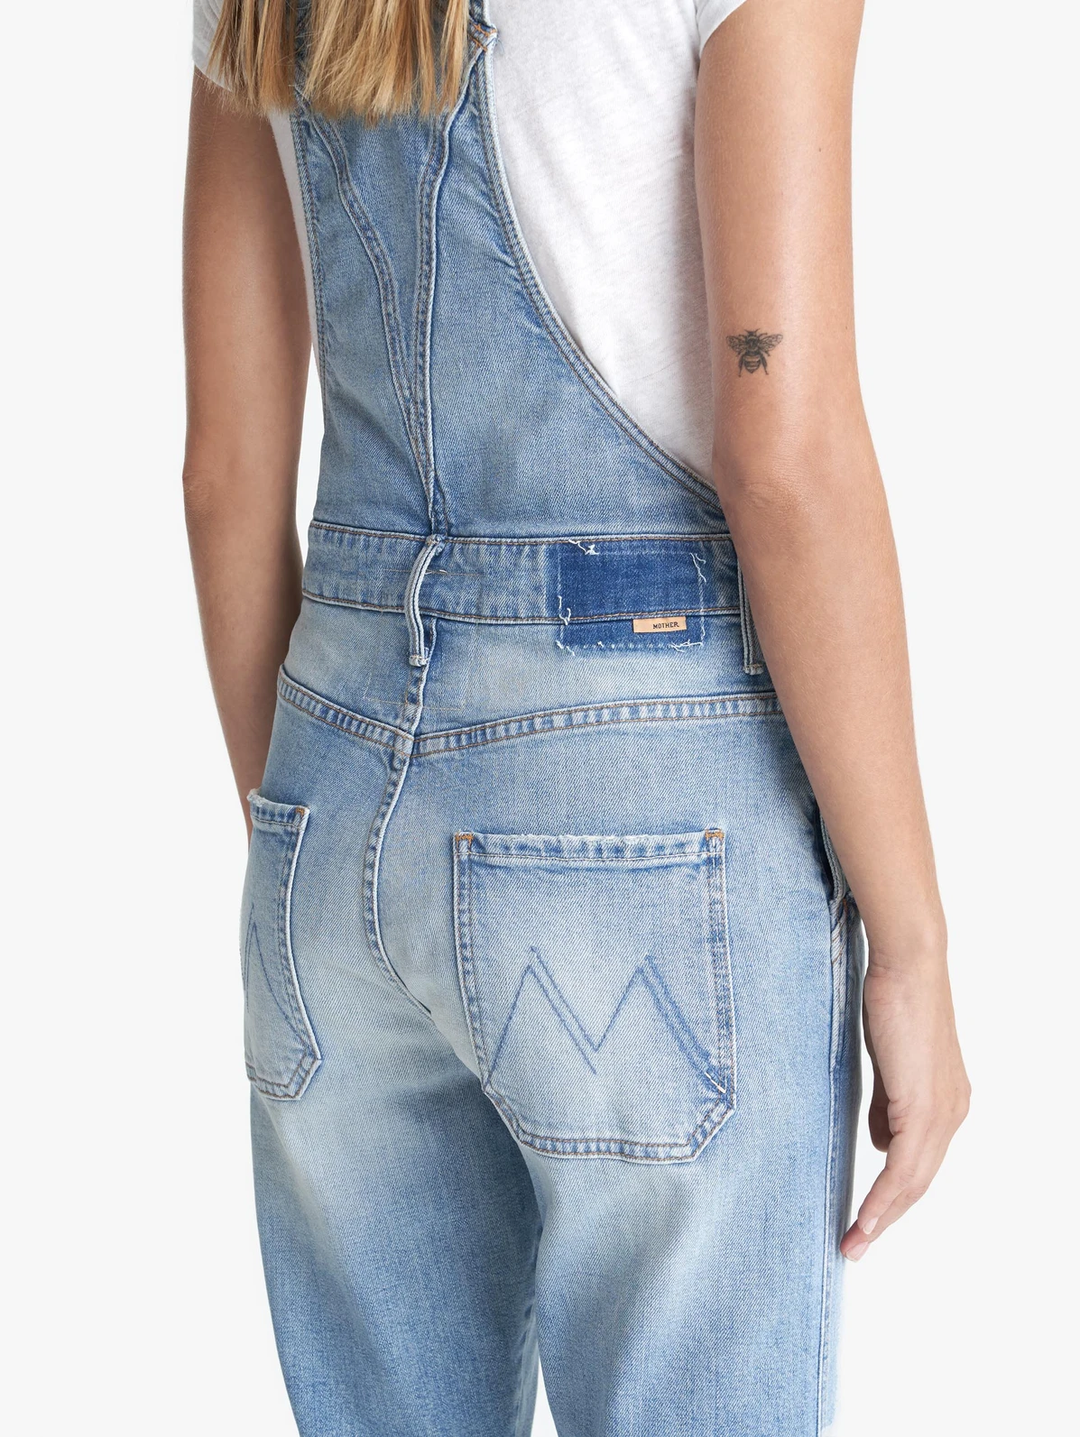 Mother Denim - The Tripper Overall Ankle in I Confess Wash